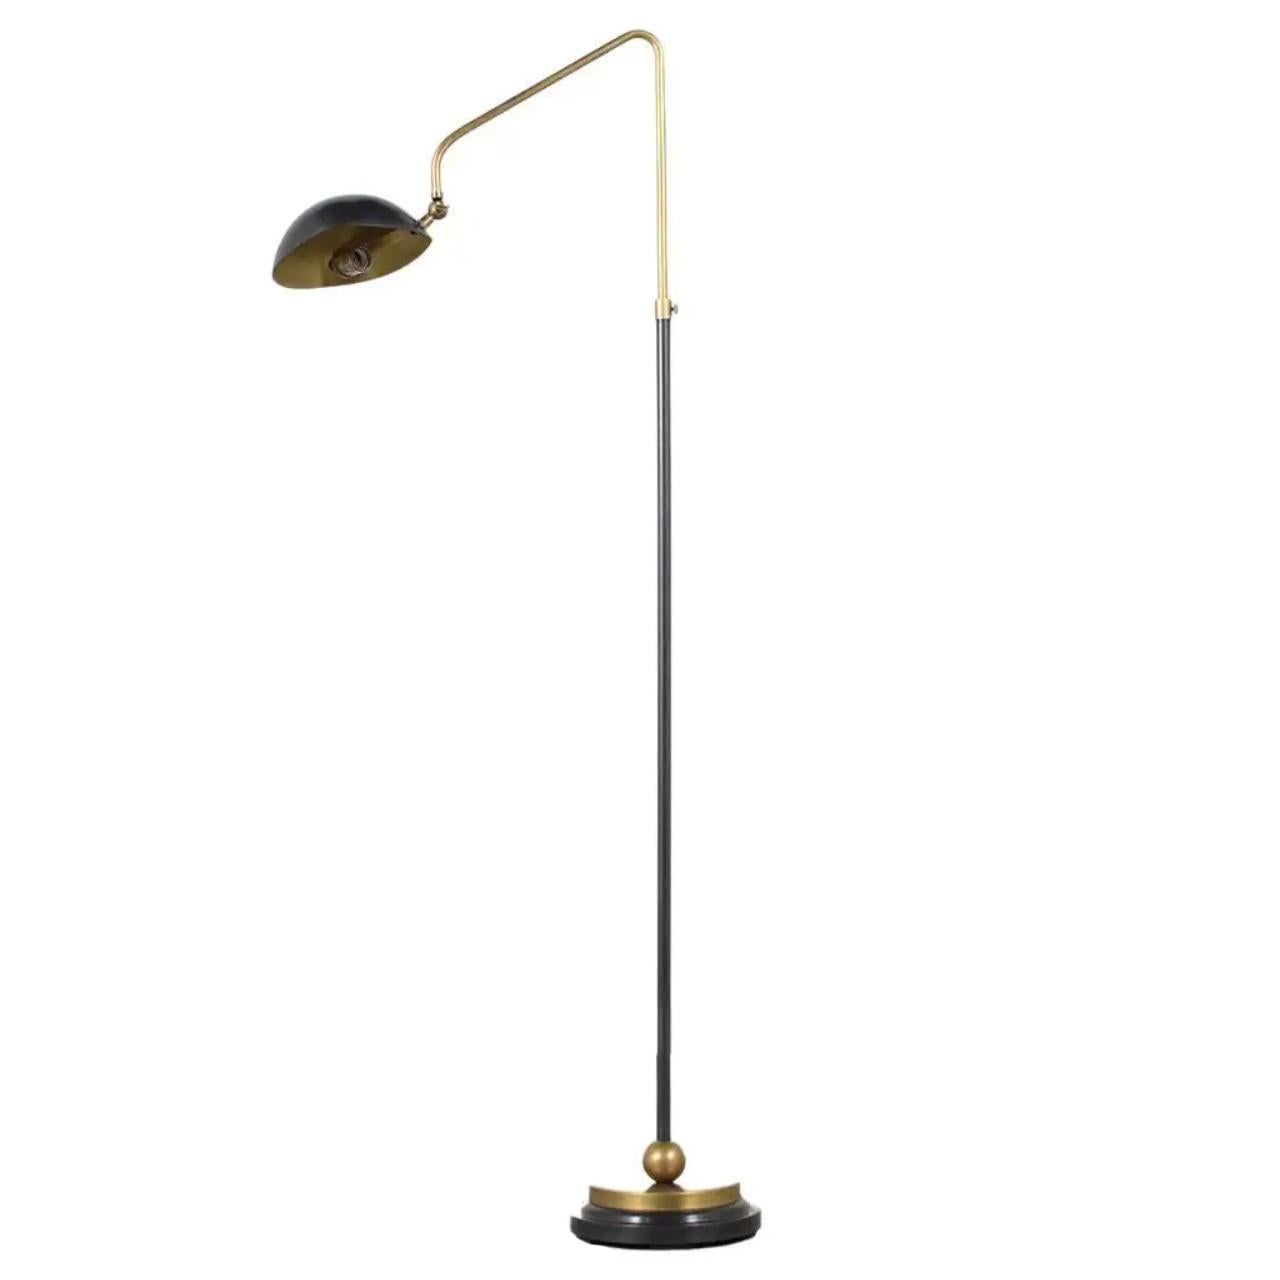 Patinated Mid-Century Modern Brass Floor Lamp with Adjustable Dimmer For Sale